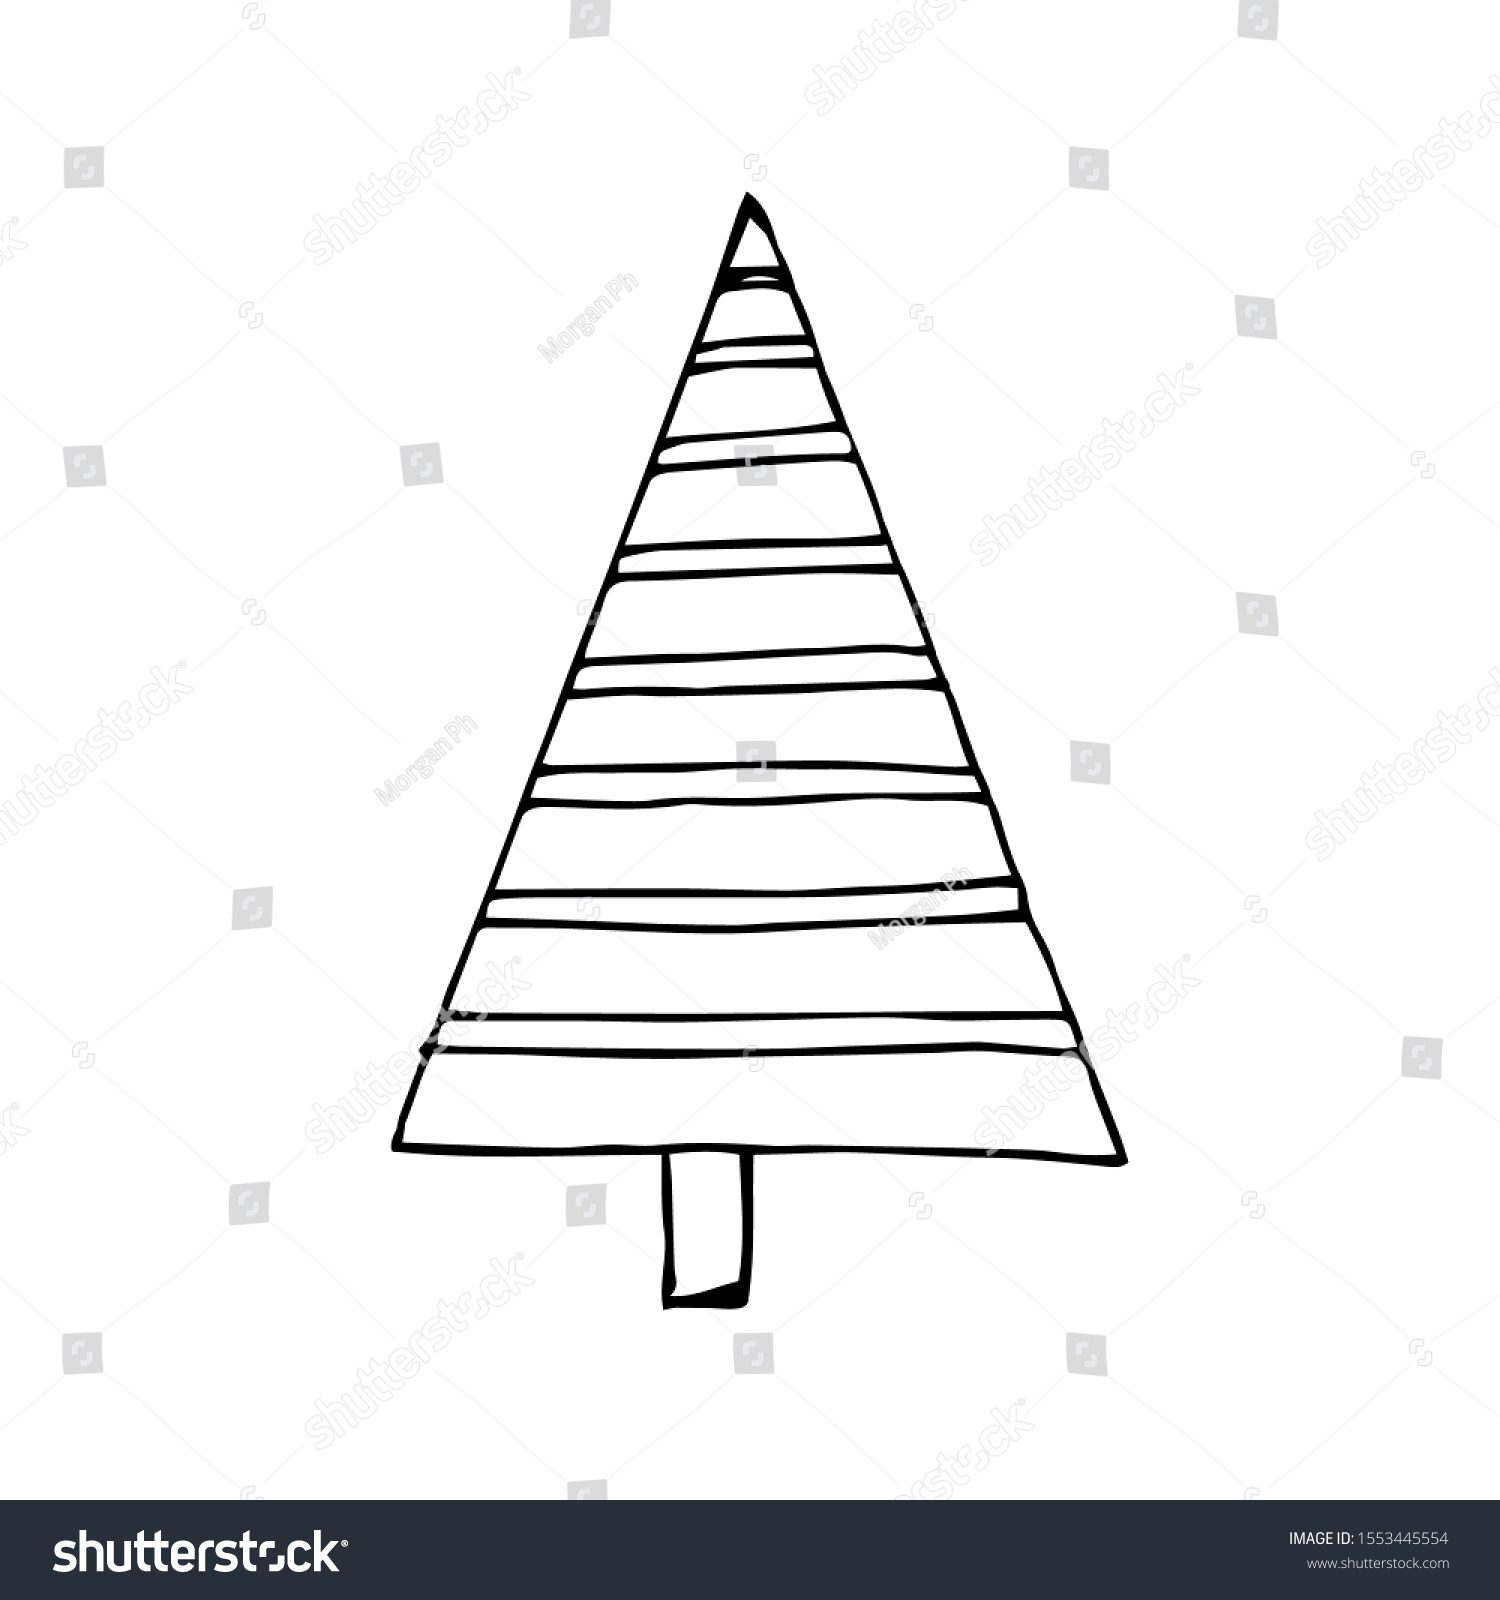 Merry Christmas and happy new year striped tree. Vector illustration with hand drawn sketch sketch Christmas tree decorations for holiday cards invitations or greetings. #1553445554